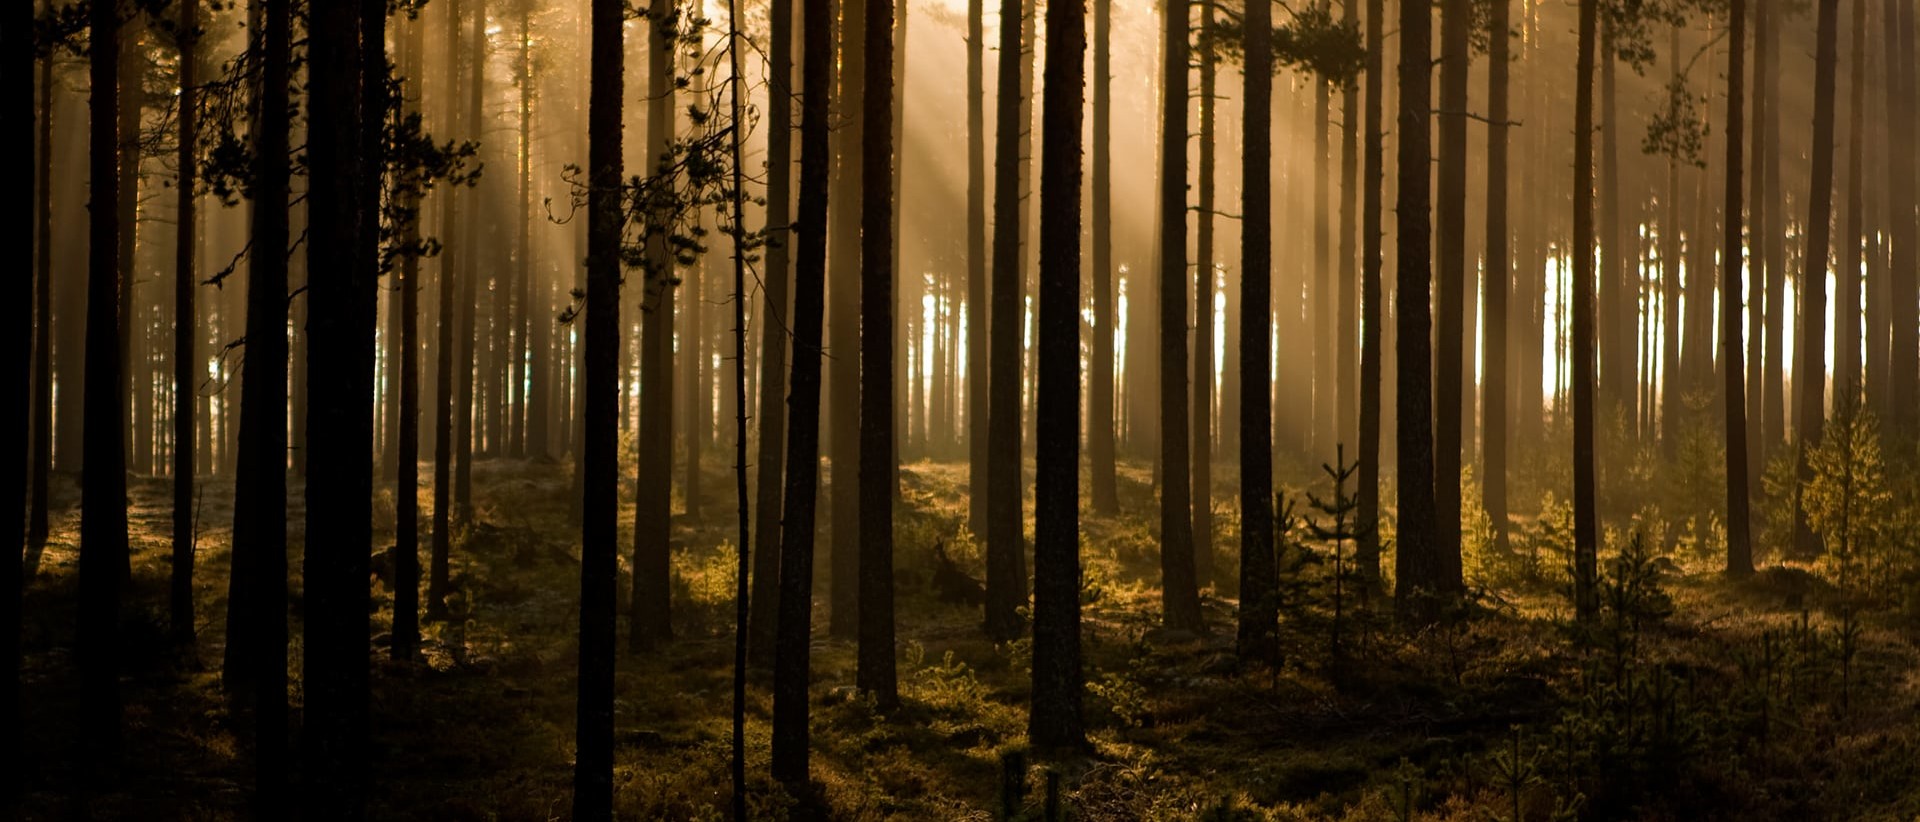 The sun is setting over a forrest with tall trees.